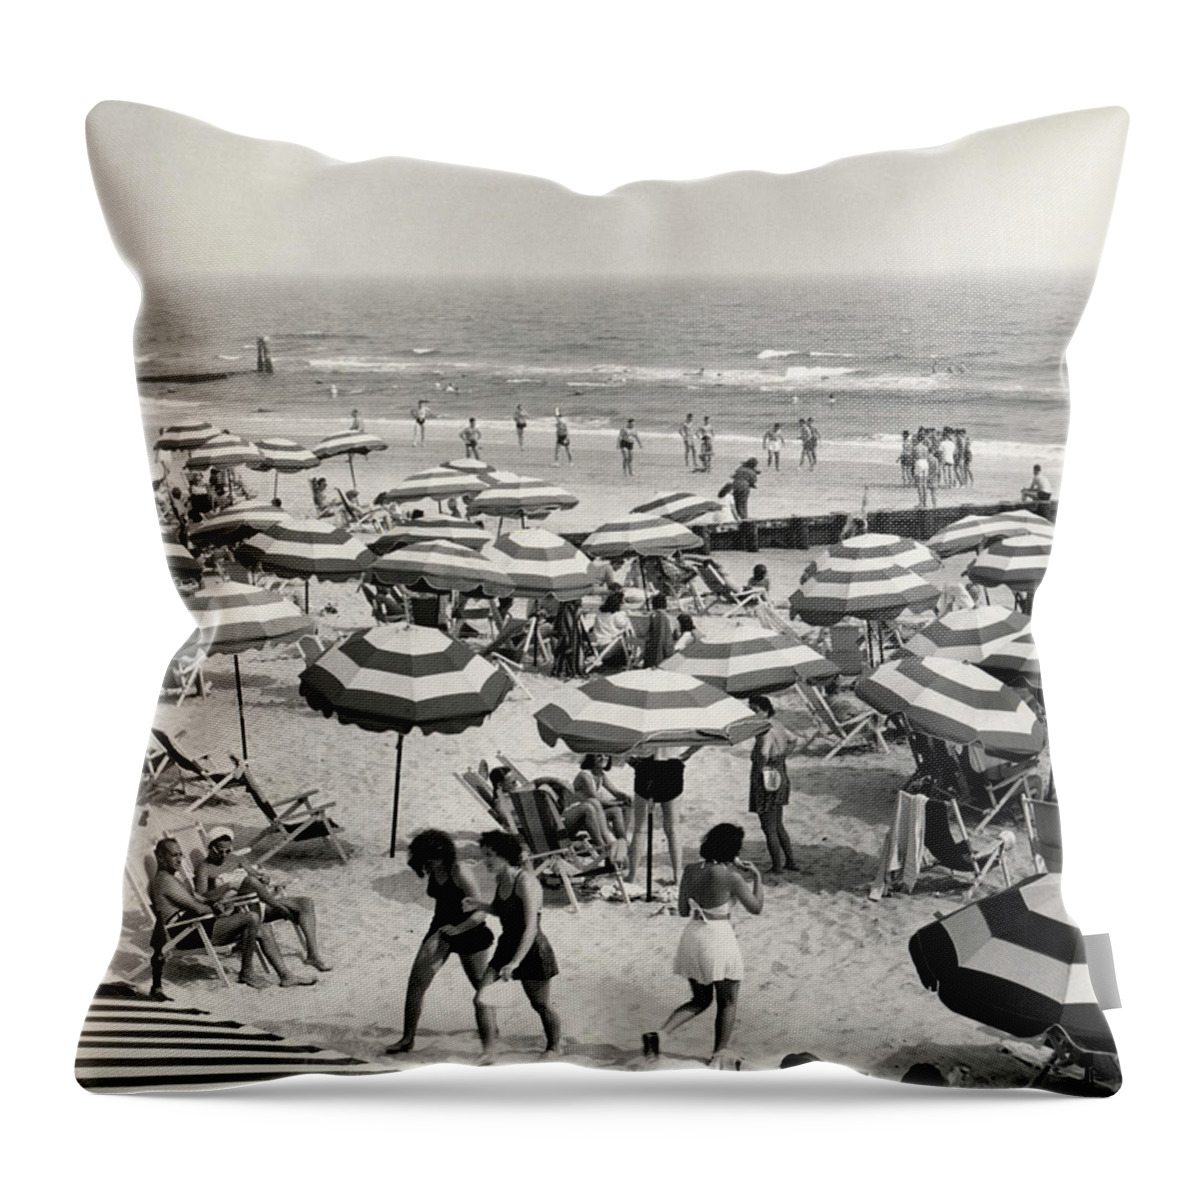 People Throw Pillow featuring the photograph Atlantic City, Nj by George Marks